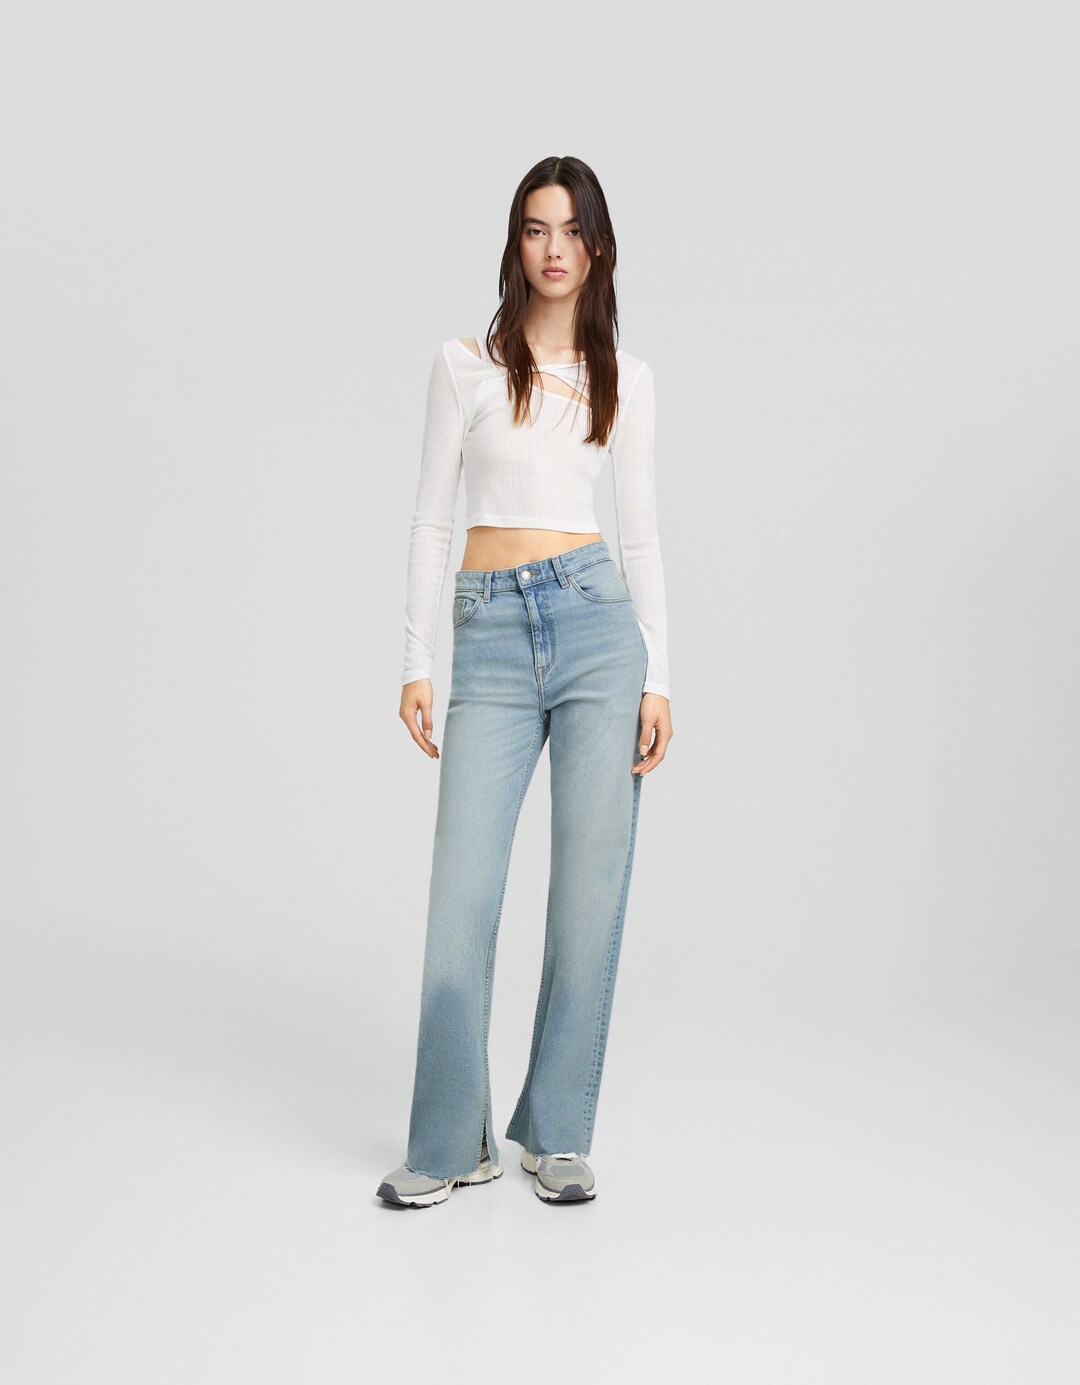 Jeans straight confort abertura lateral